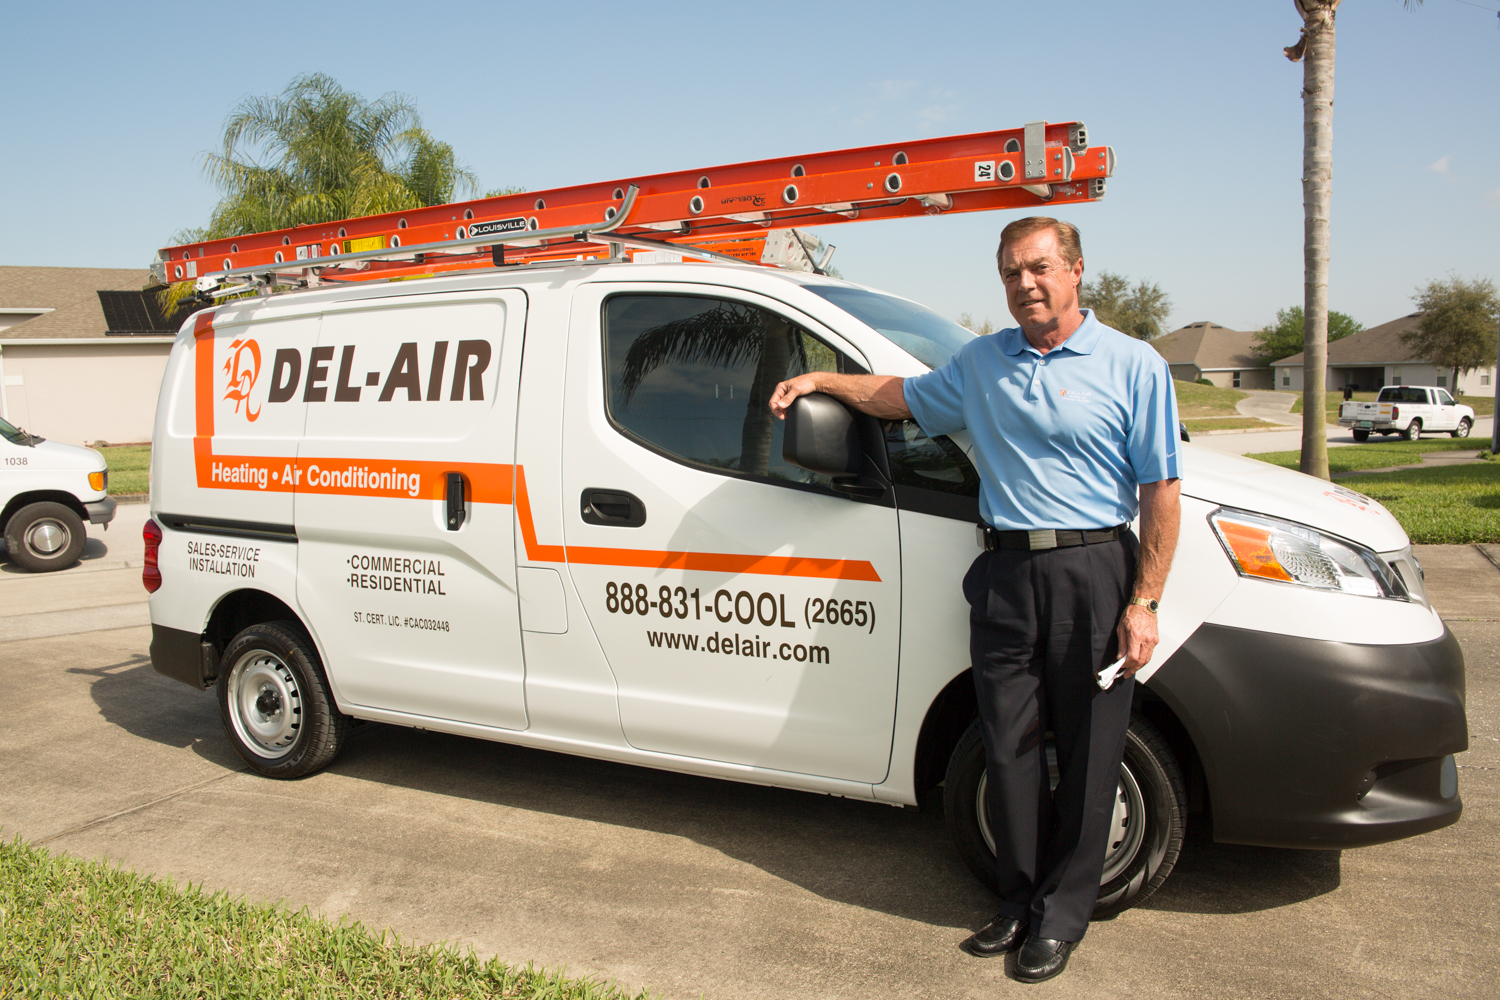 Del-Air Heating and Air Conditioning - Customer Focused Marketing Group